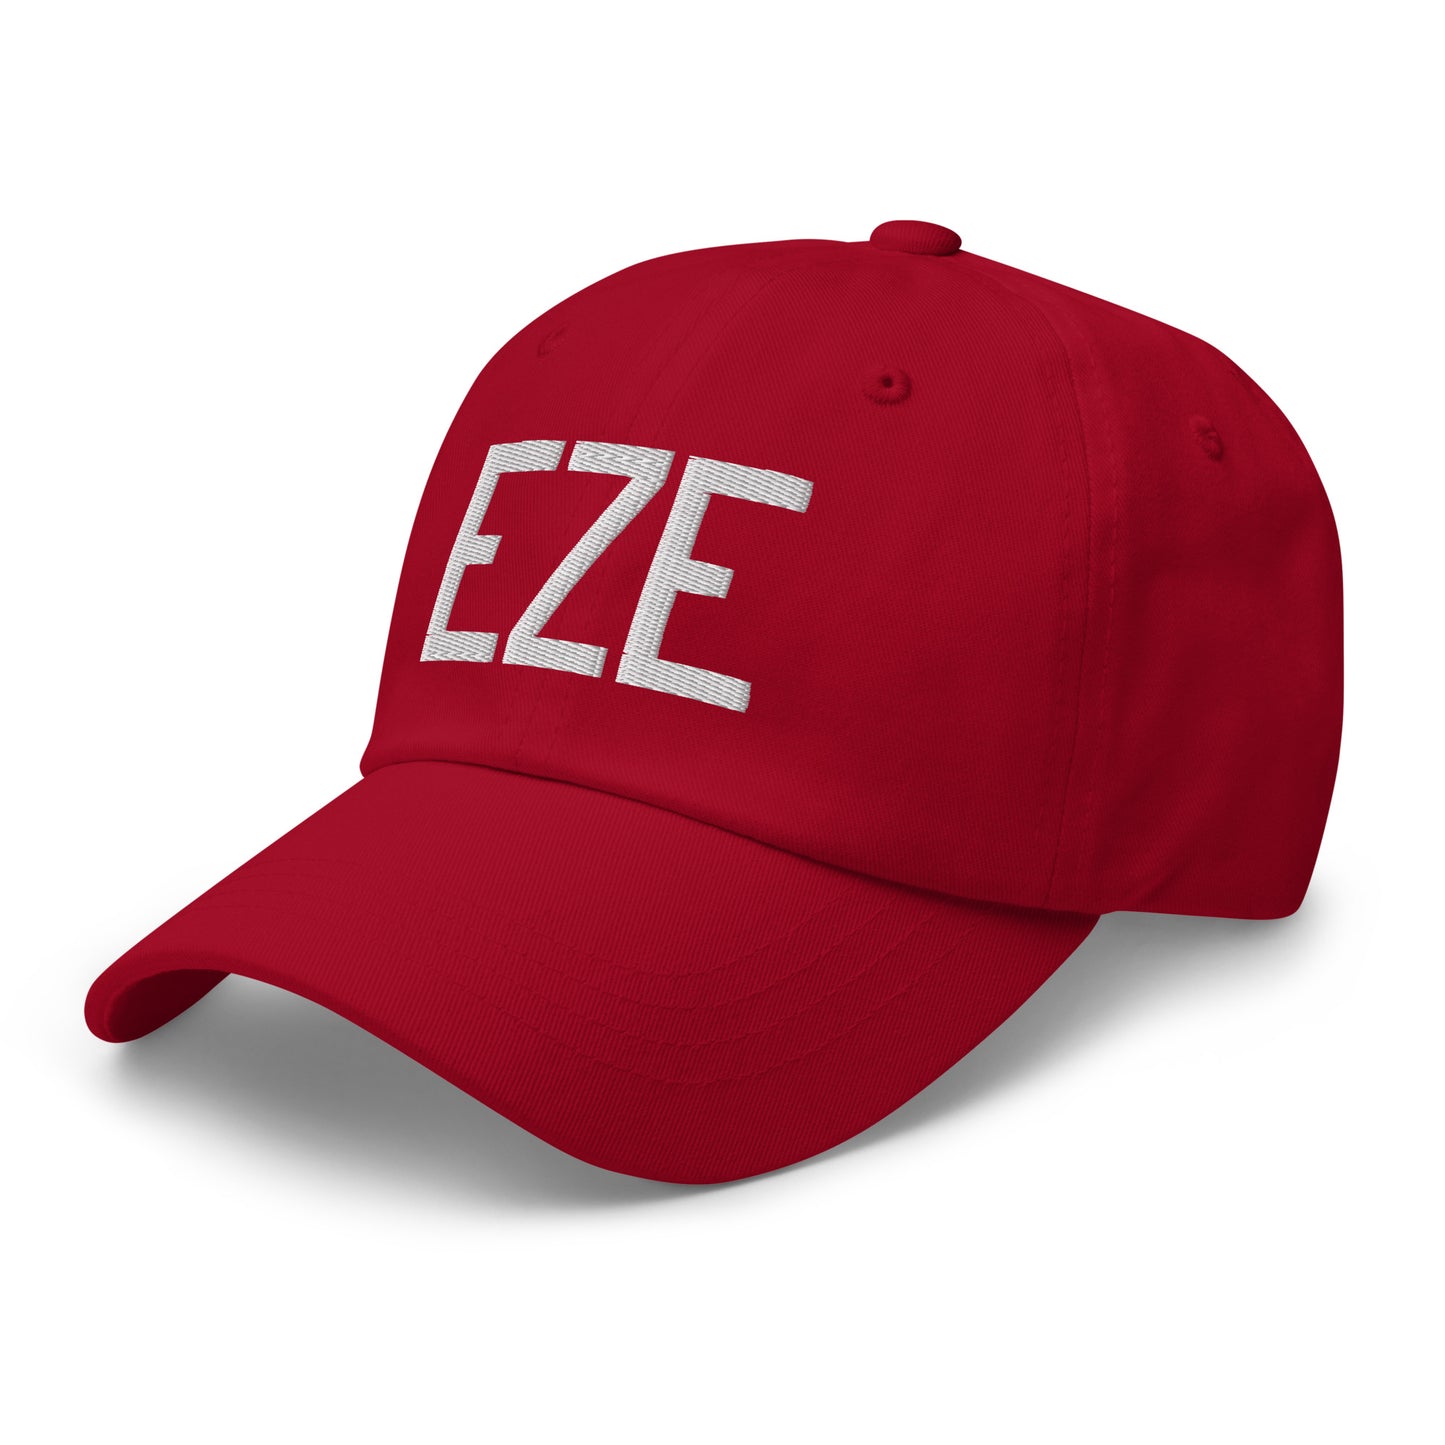 Airport Code Baseball Cap - White • EZE Buenos Aires • YHM Designs - Image 21